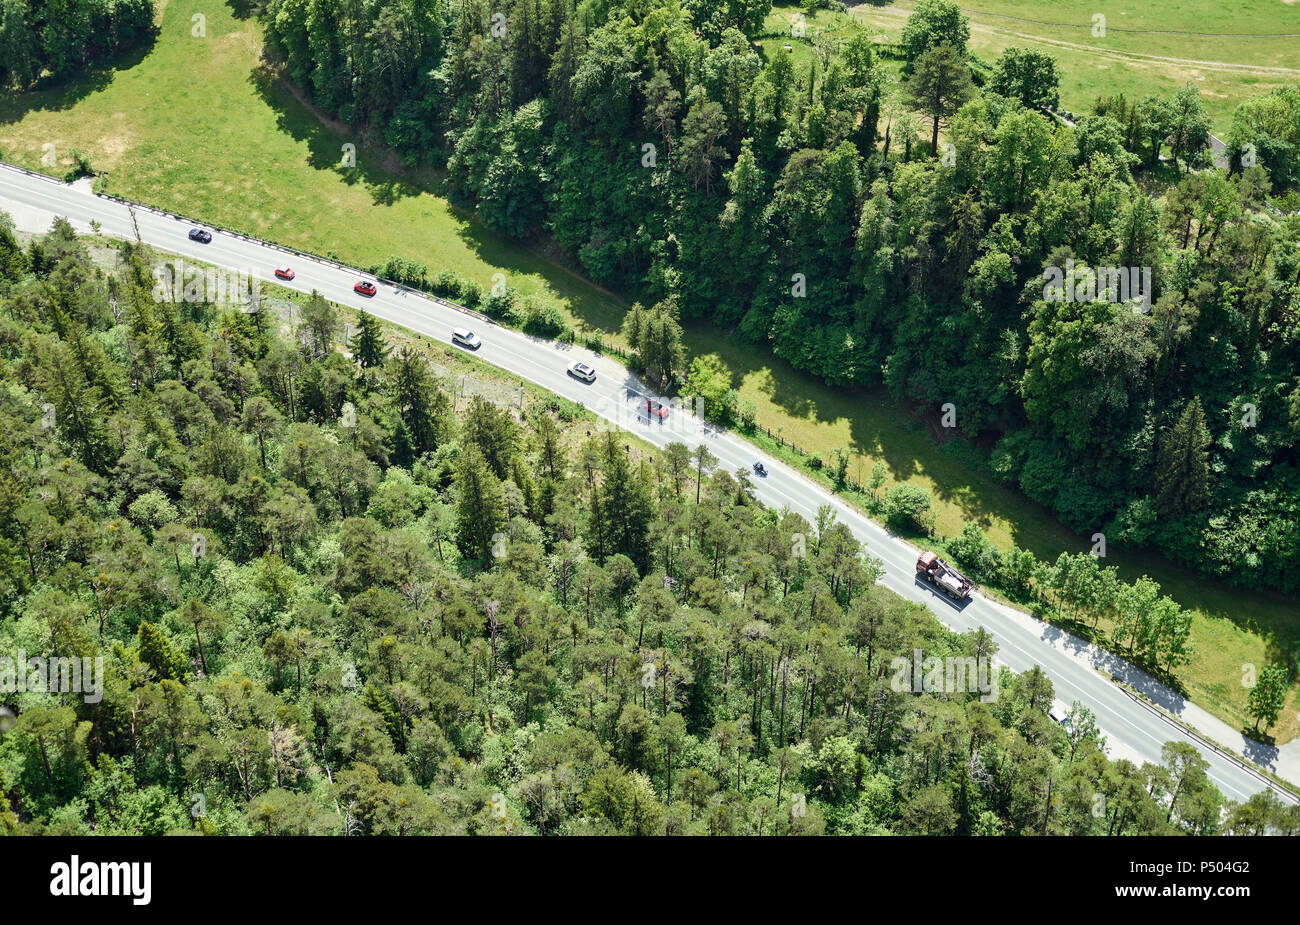 Austria, Tyrol, Aerial view of country road Stock Photo